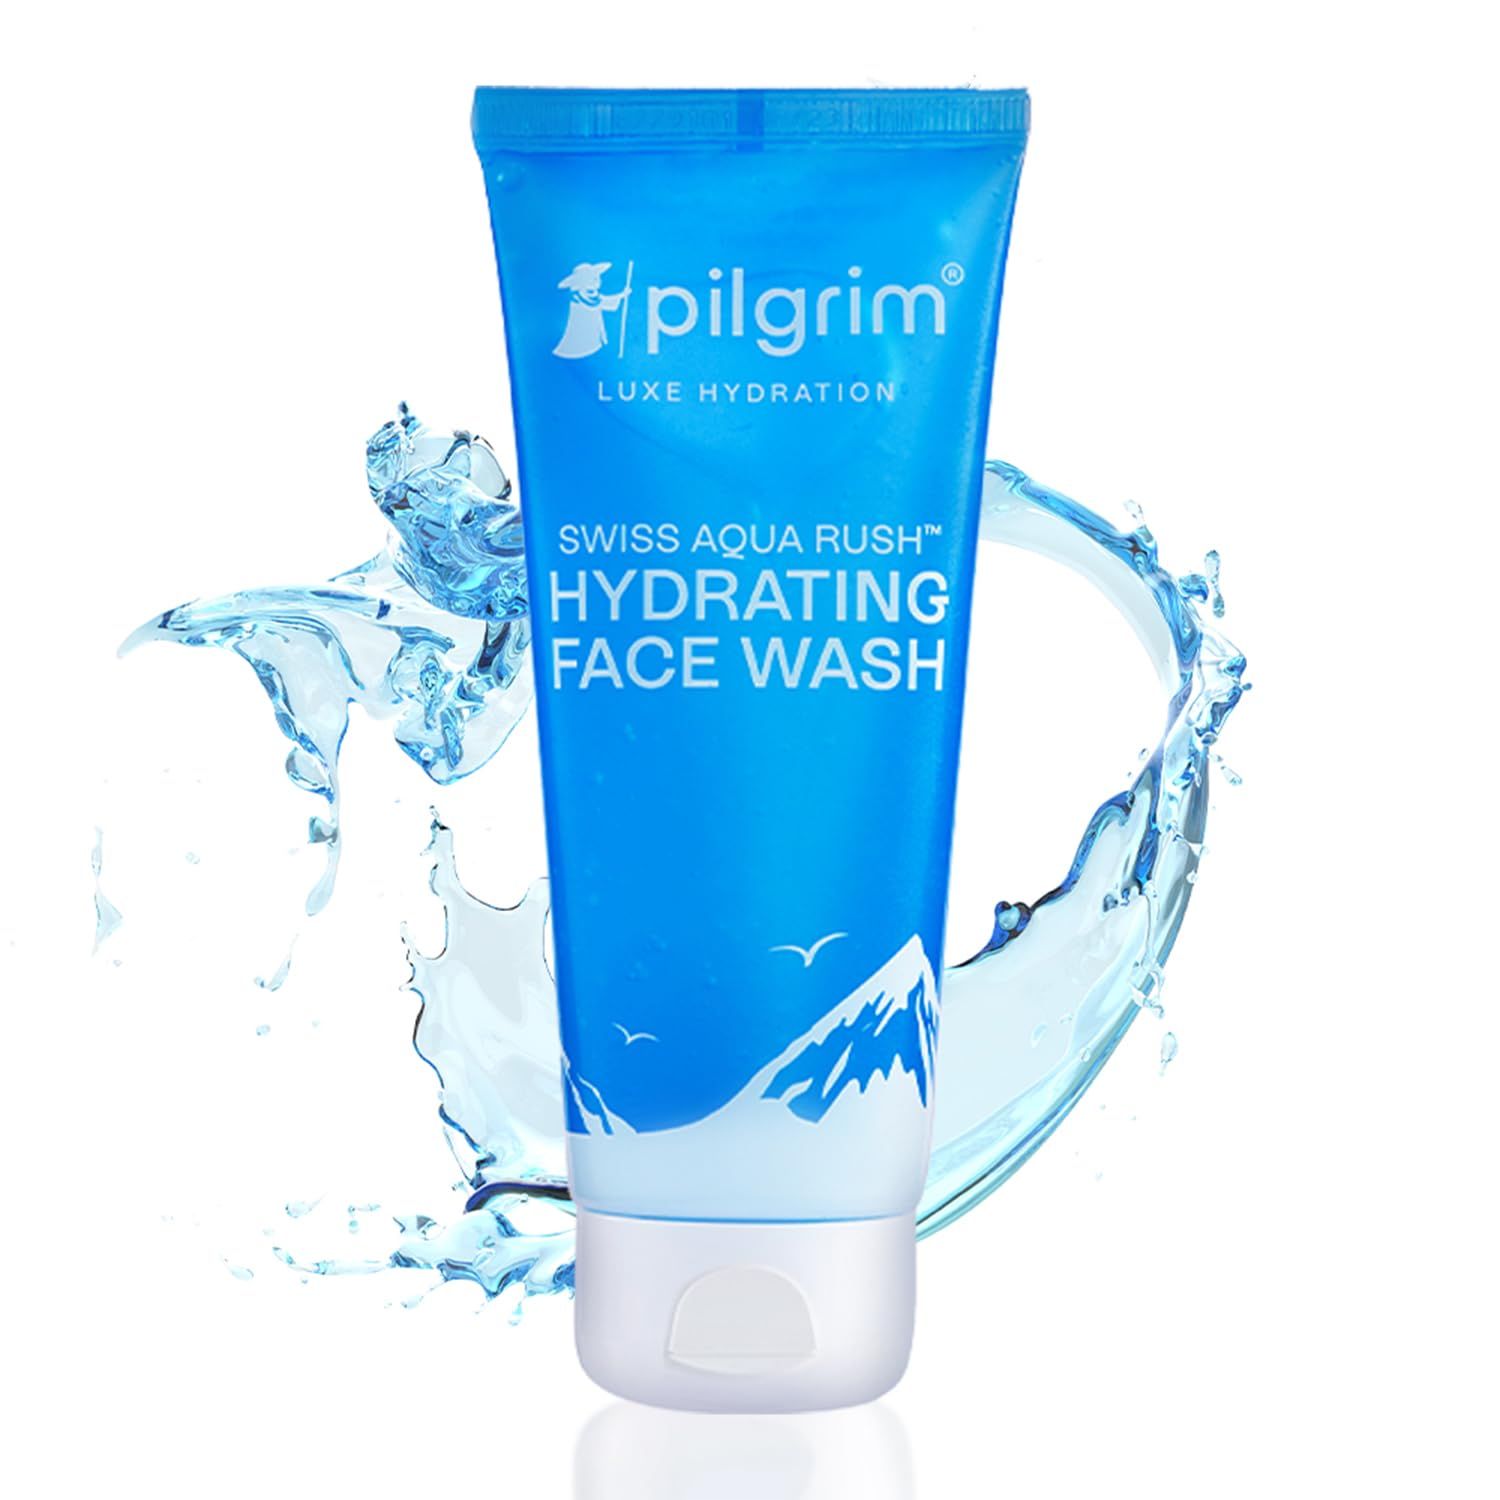 Pilgrim SWISS AQUA RUSH� HYDRATING FACE WASH for men & women | Crafted with powerful hydrators - Pentavitin, Aquaxyl, Swiss Aqua Rush | Hydrating Face wash | Refreshes skin & restores hydration|100 ml